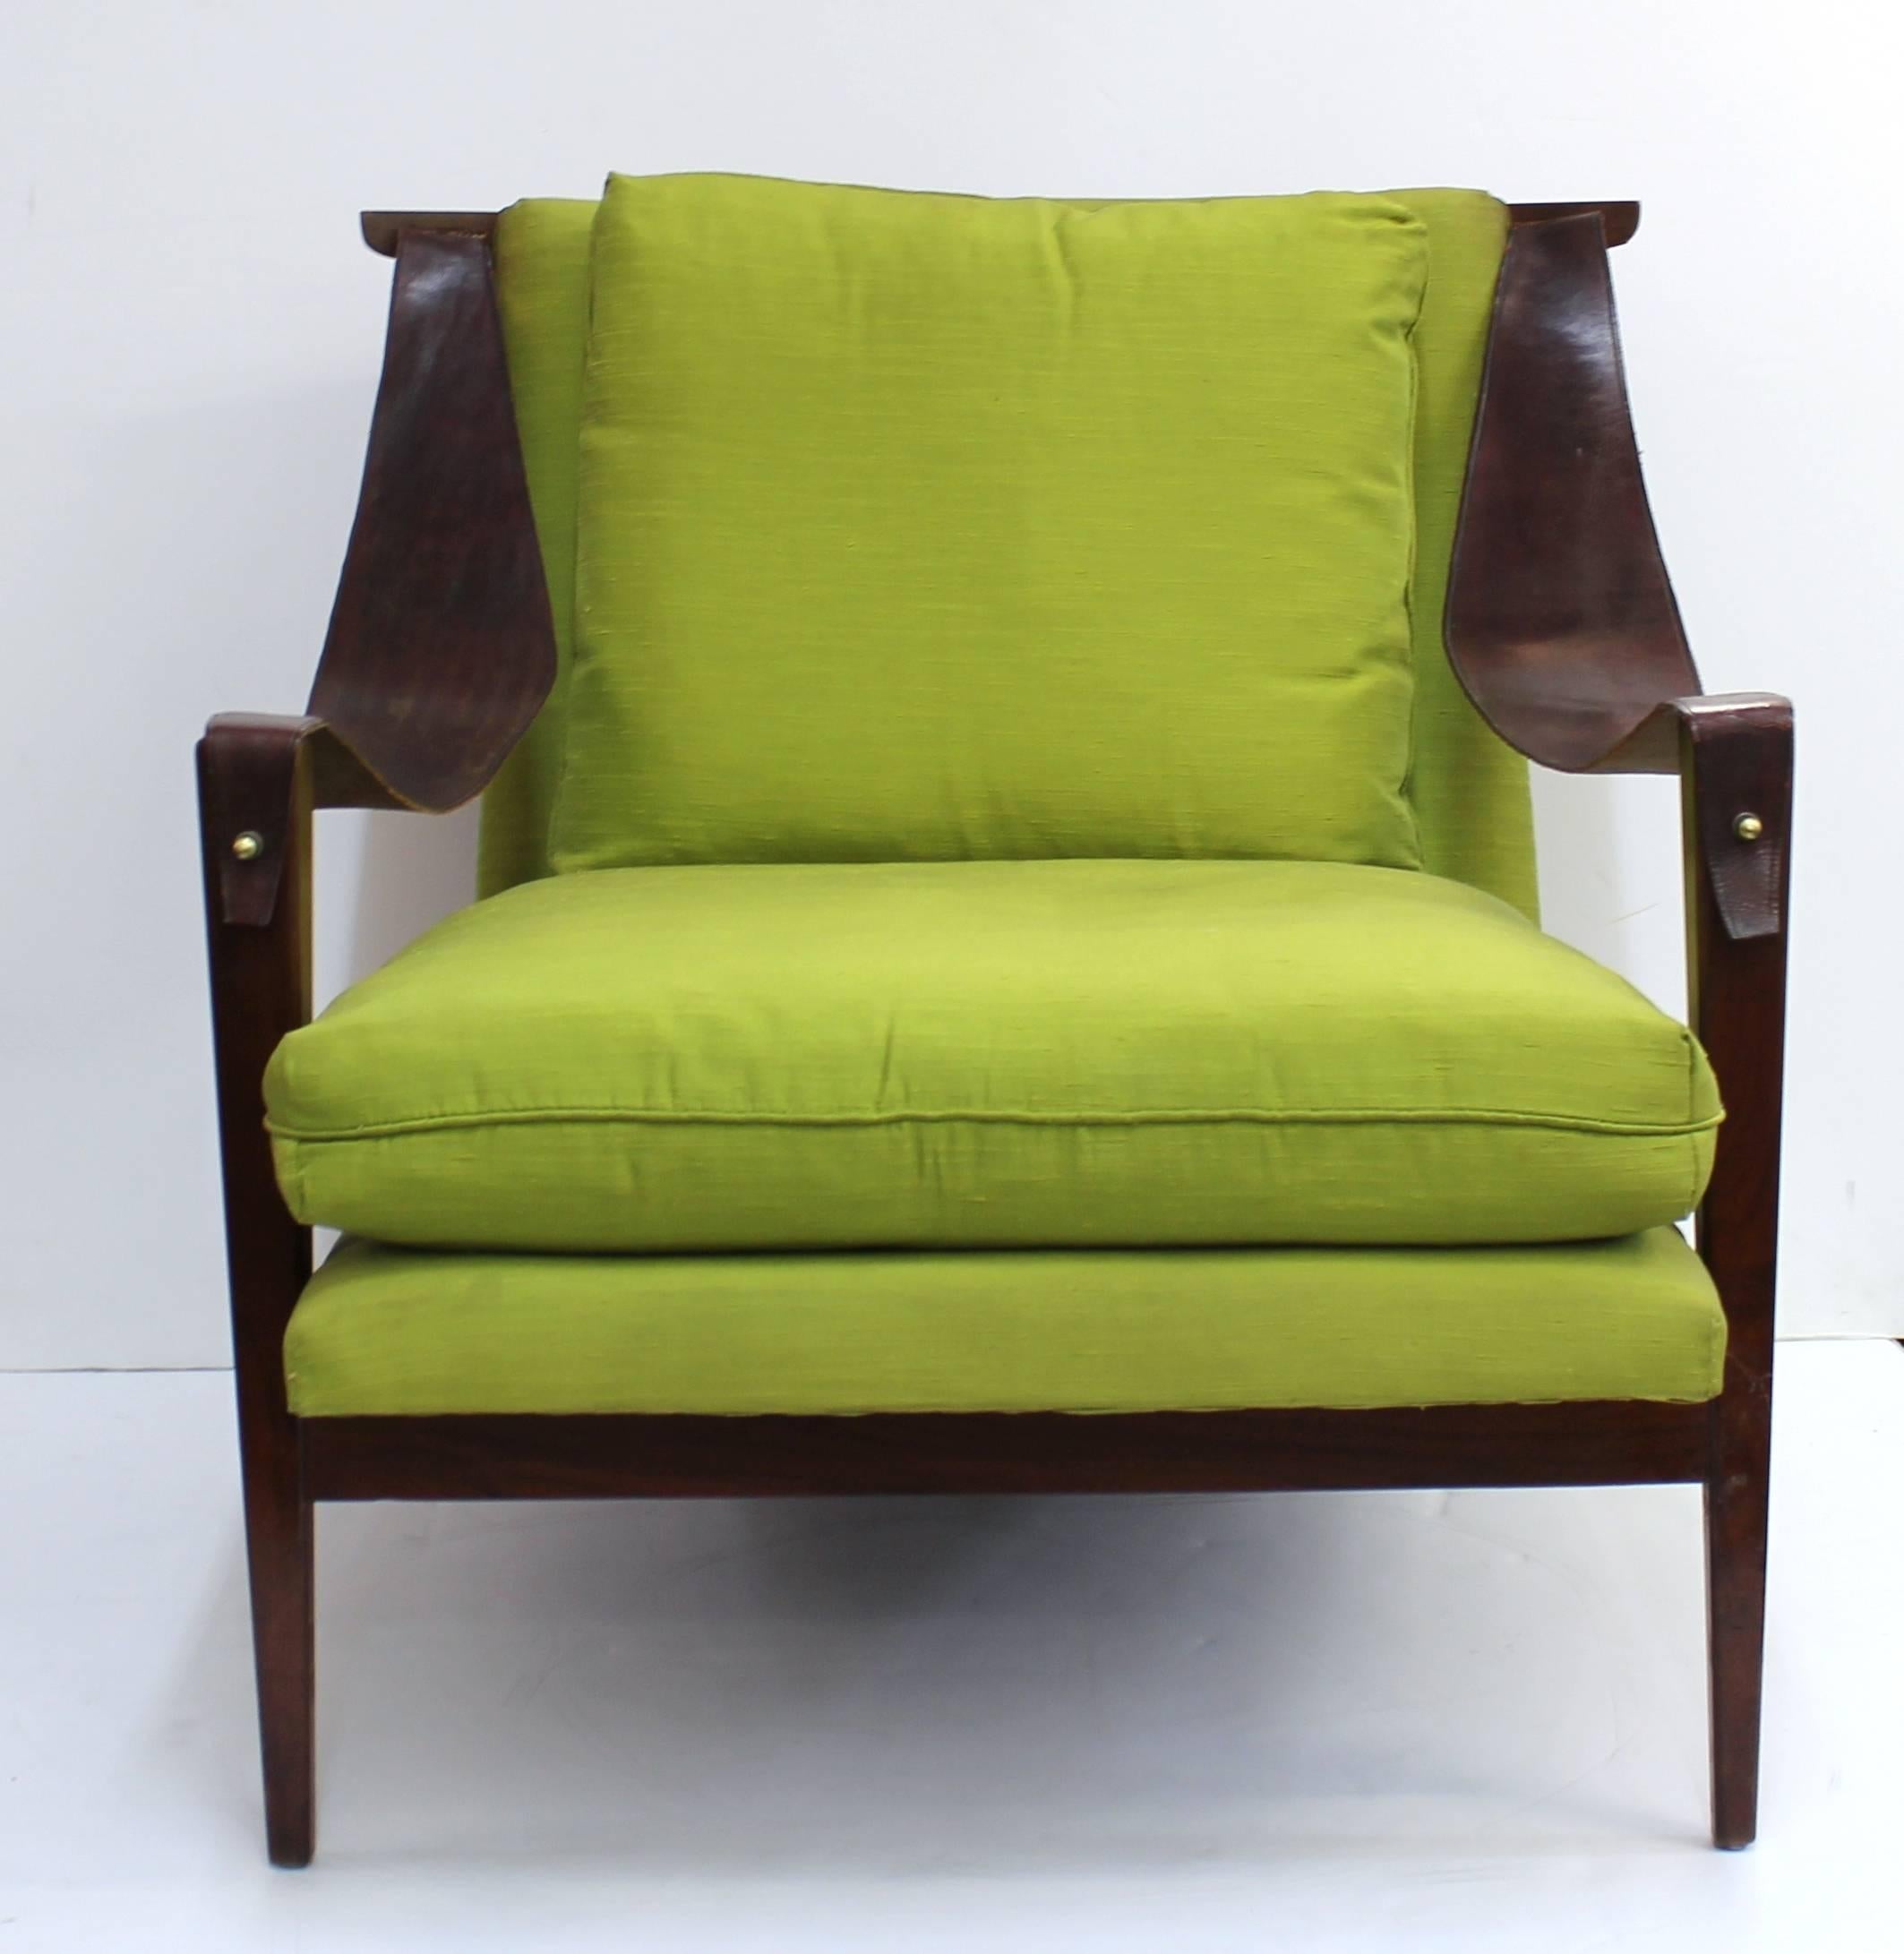 Enfield armchairs with leather swing arms. The chairs are upholstered in bright green fabric and feature solid dark wood frames on tessellated legs. Some visible wear including cracking to leather, arms becoming un-fixed and small chips to wood